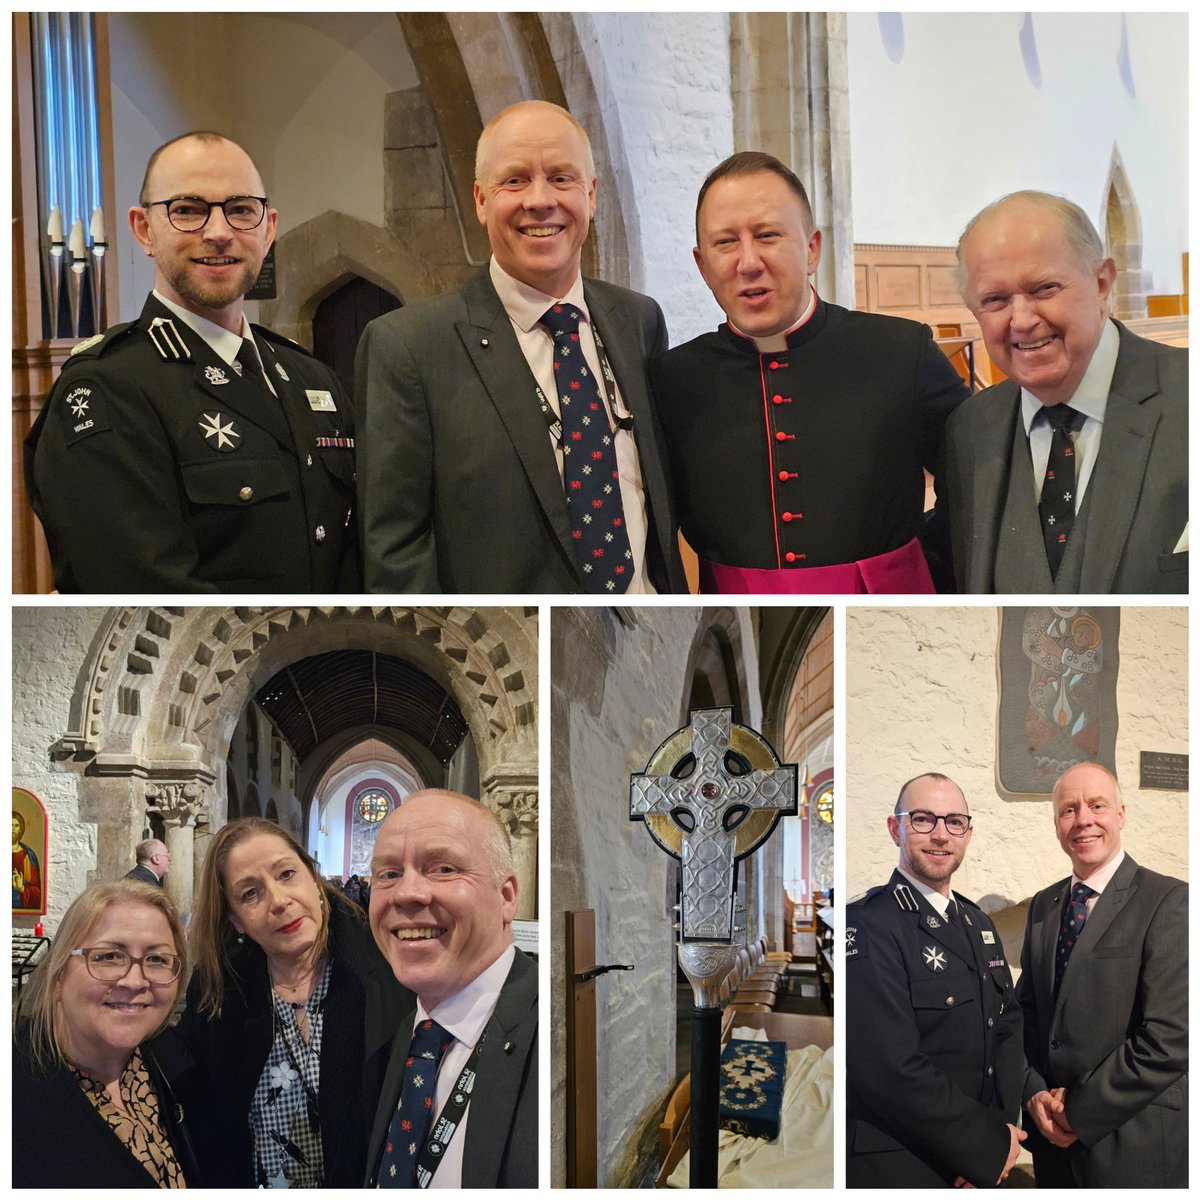 Wonderful to have been invited by the @ChurchinWales with friends, to observe the ceremony & meeting of the Bishops who met in Sacred Synod to confirm the appointment of our @SJACymru @PrioryWales Dean; Canon David Morris as Assistant Bishop in the Diocese of Bangor 

#ProudChief